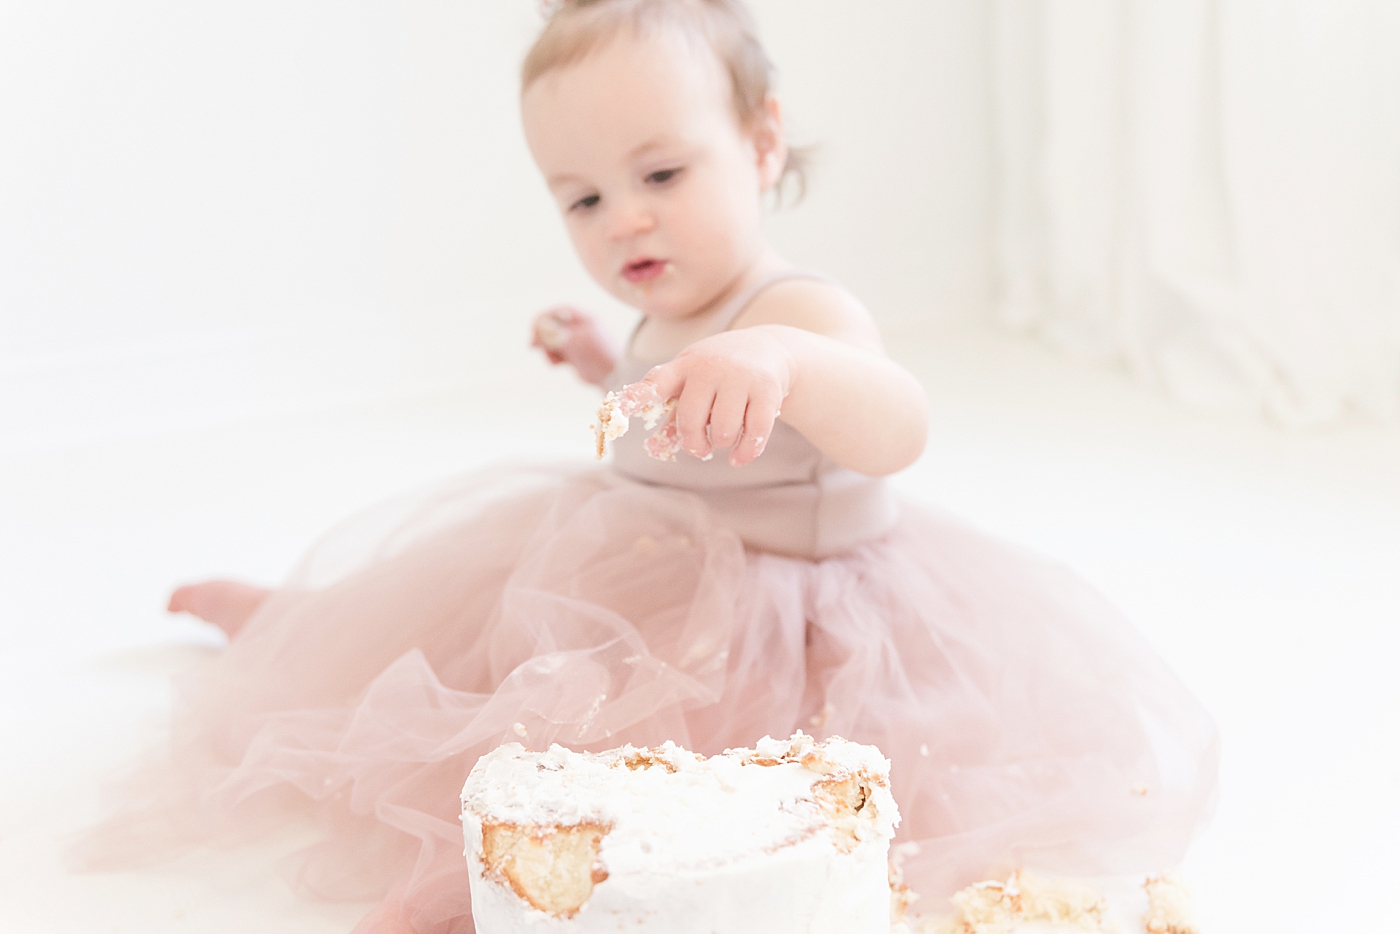 Baby girl putting finger in cake | Photo by Anna Wisjo Photography